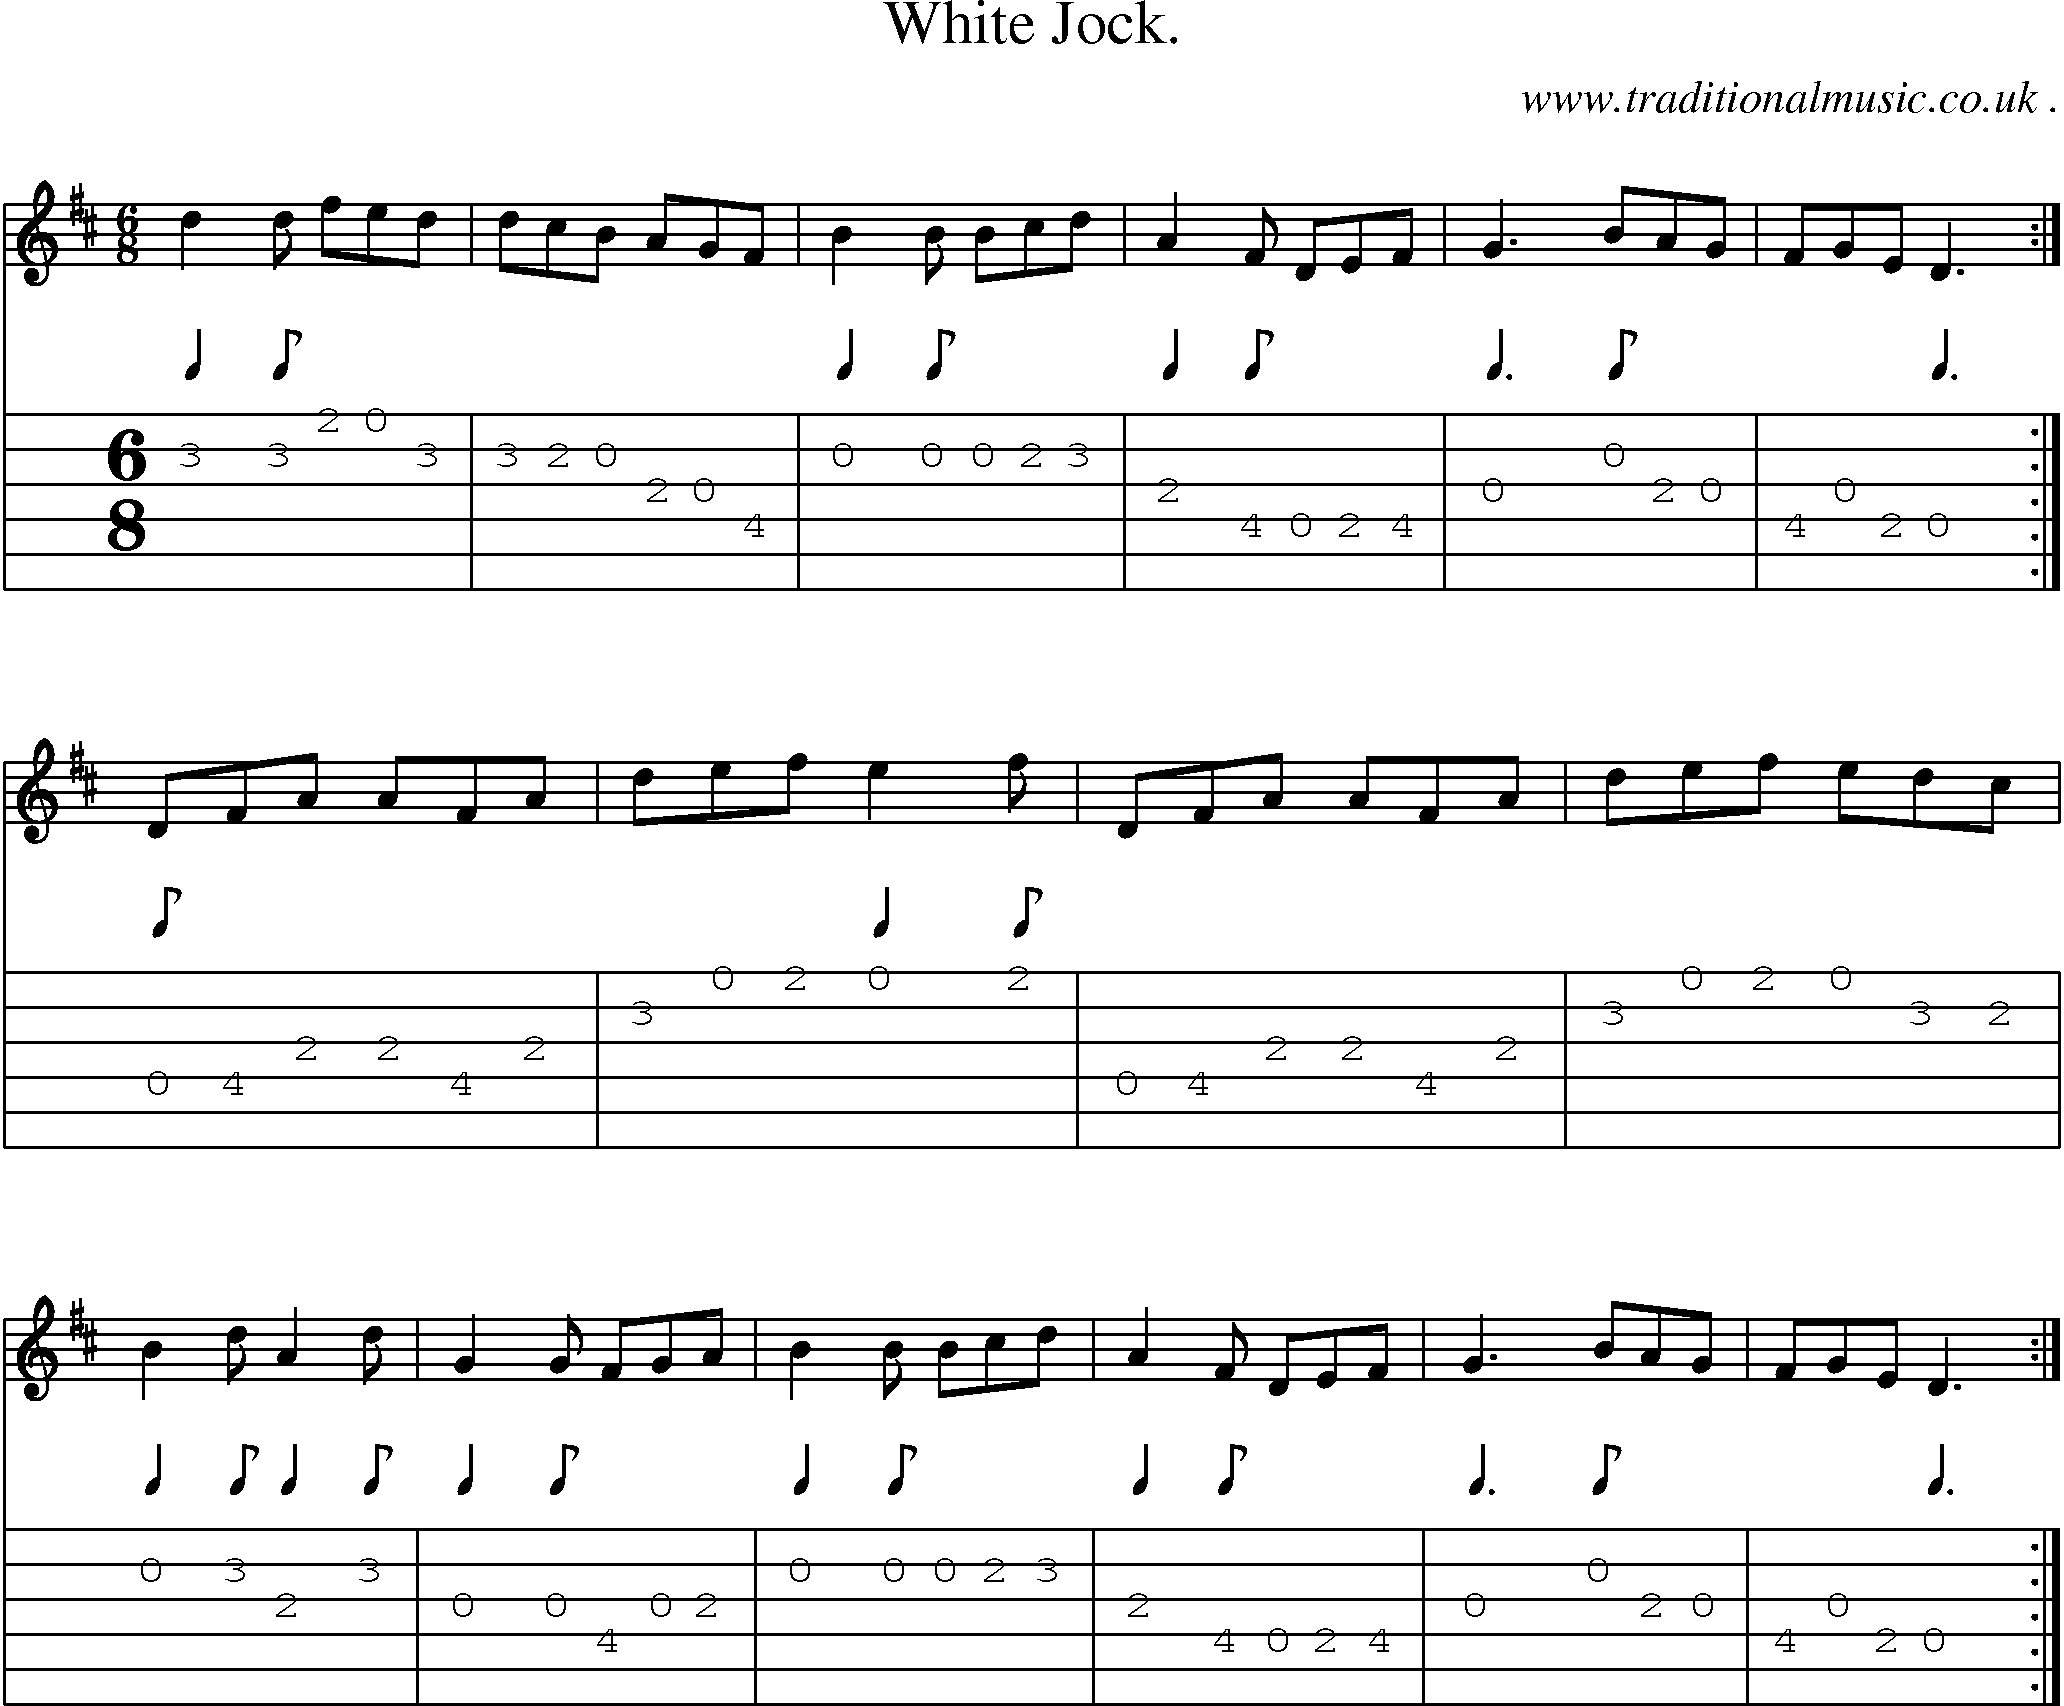 Sheet-Music and Guitar Tabs for White Jock